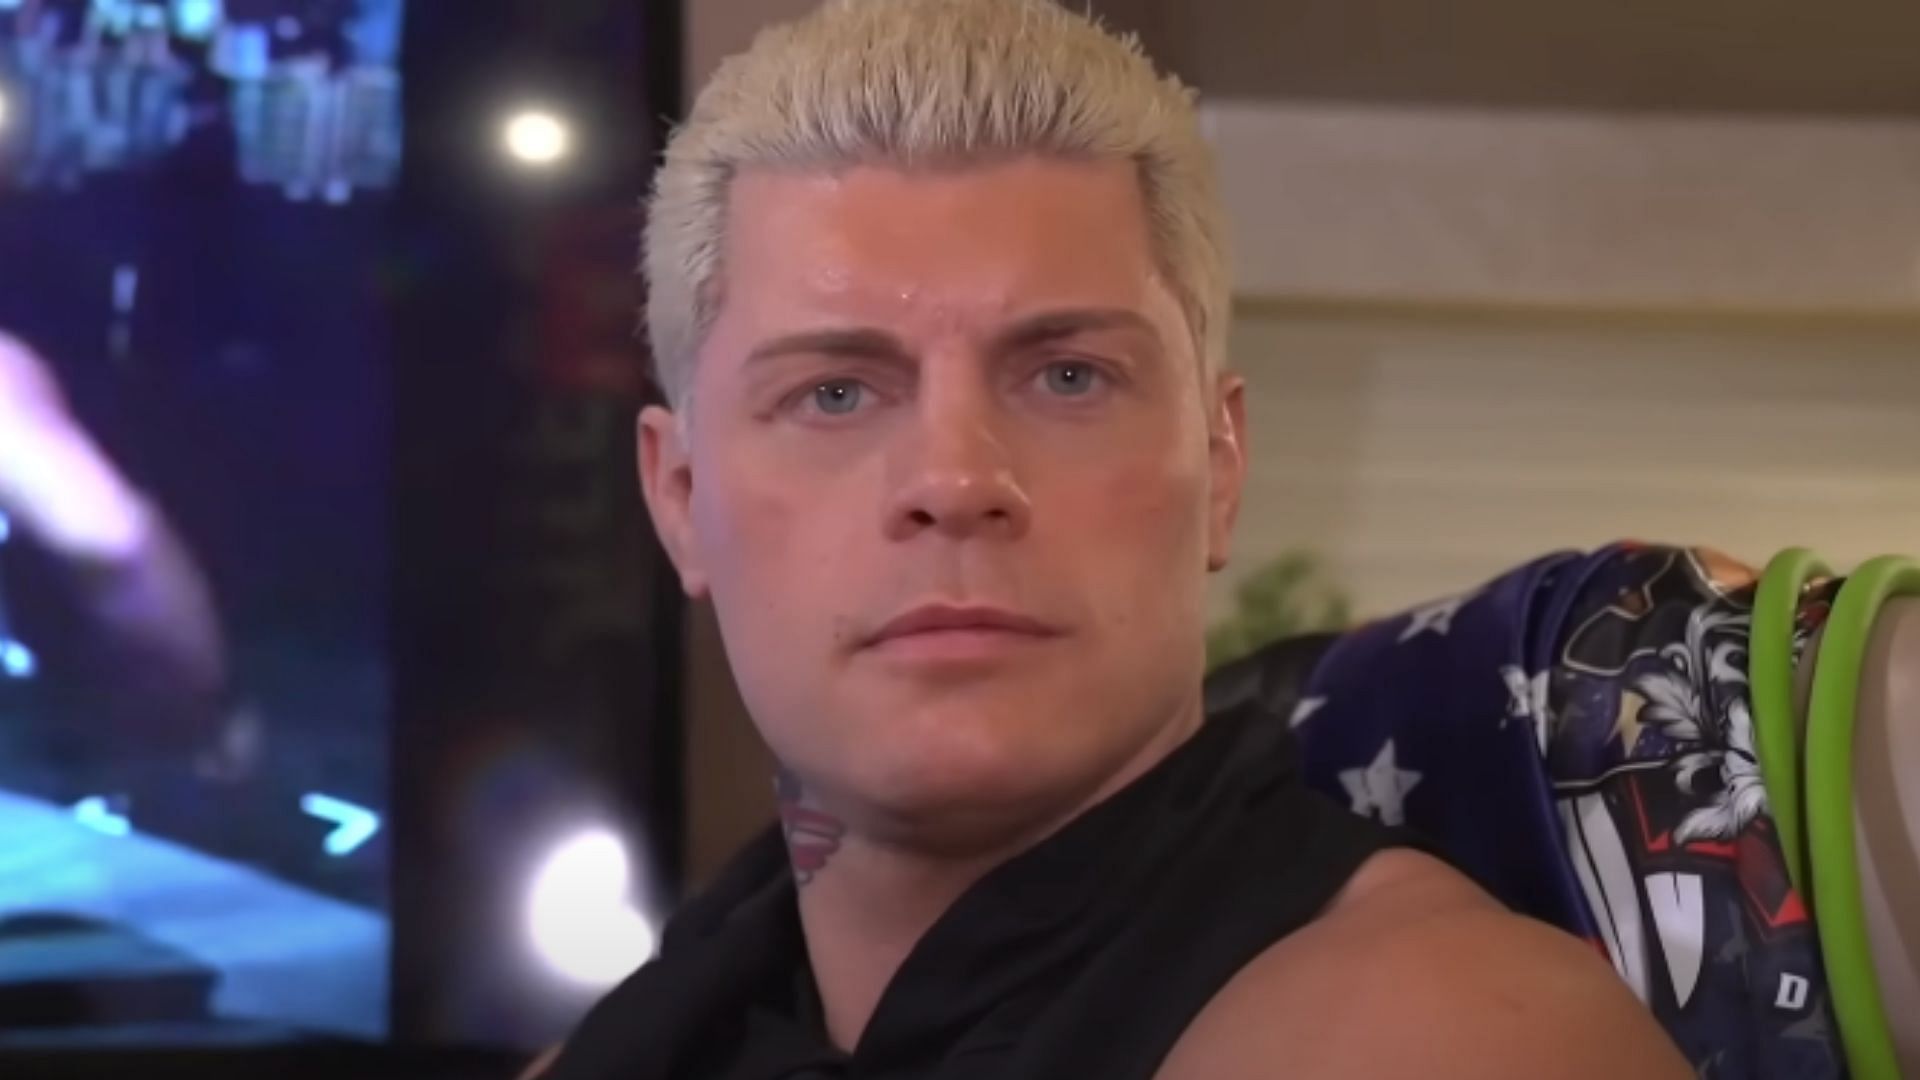 Cody Rhodes returned to WWE last month after a six-year absence.